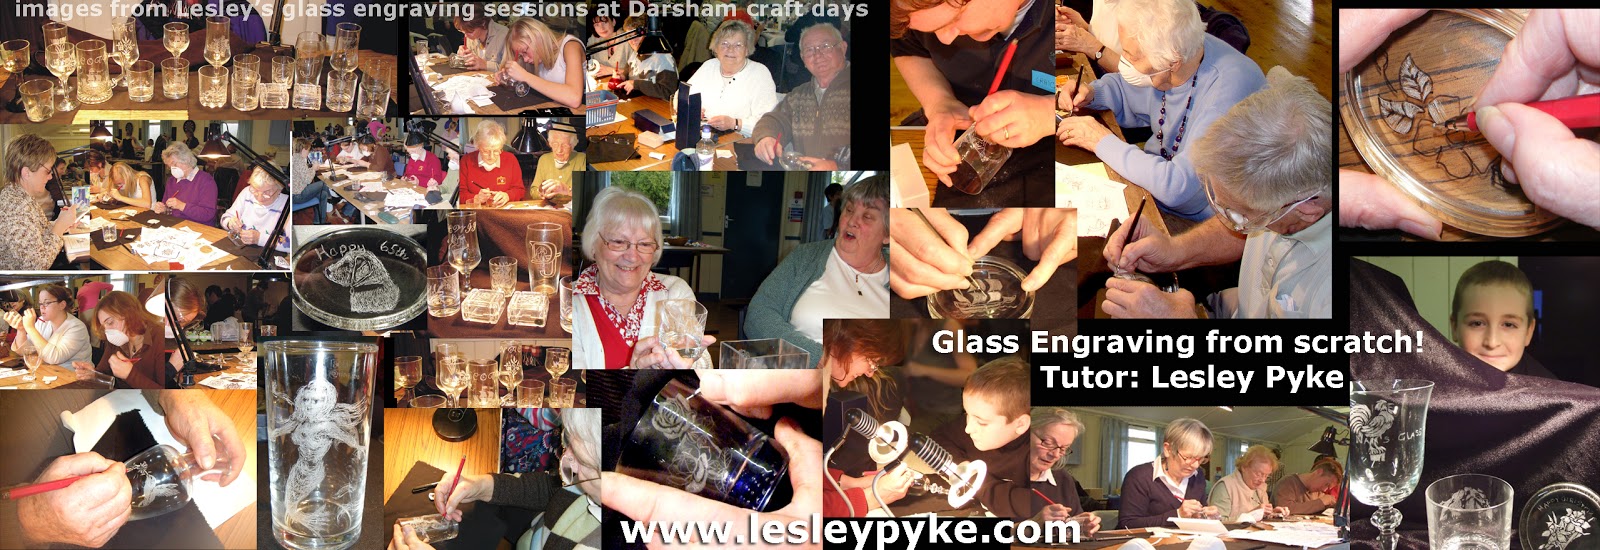 Lesley Pyke Glass Engraver  creating Glass Engraving lessons